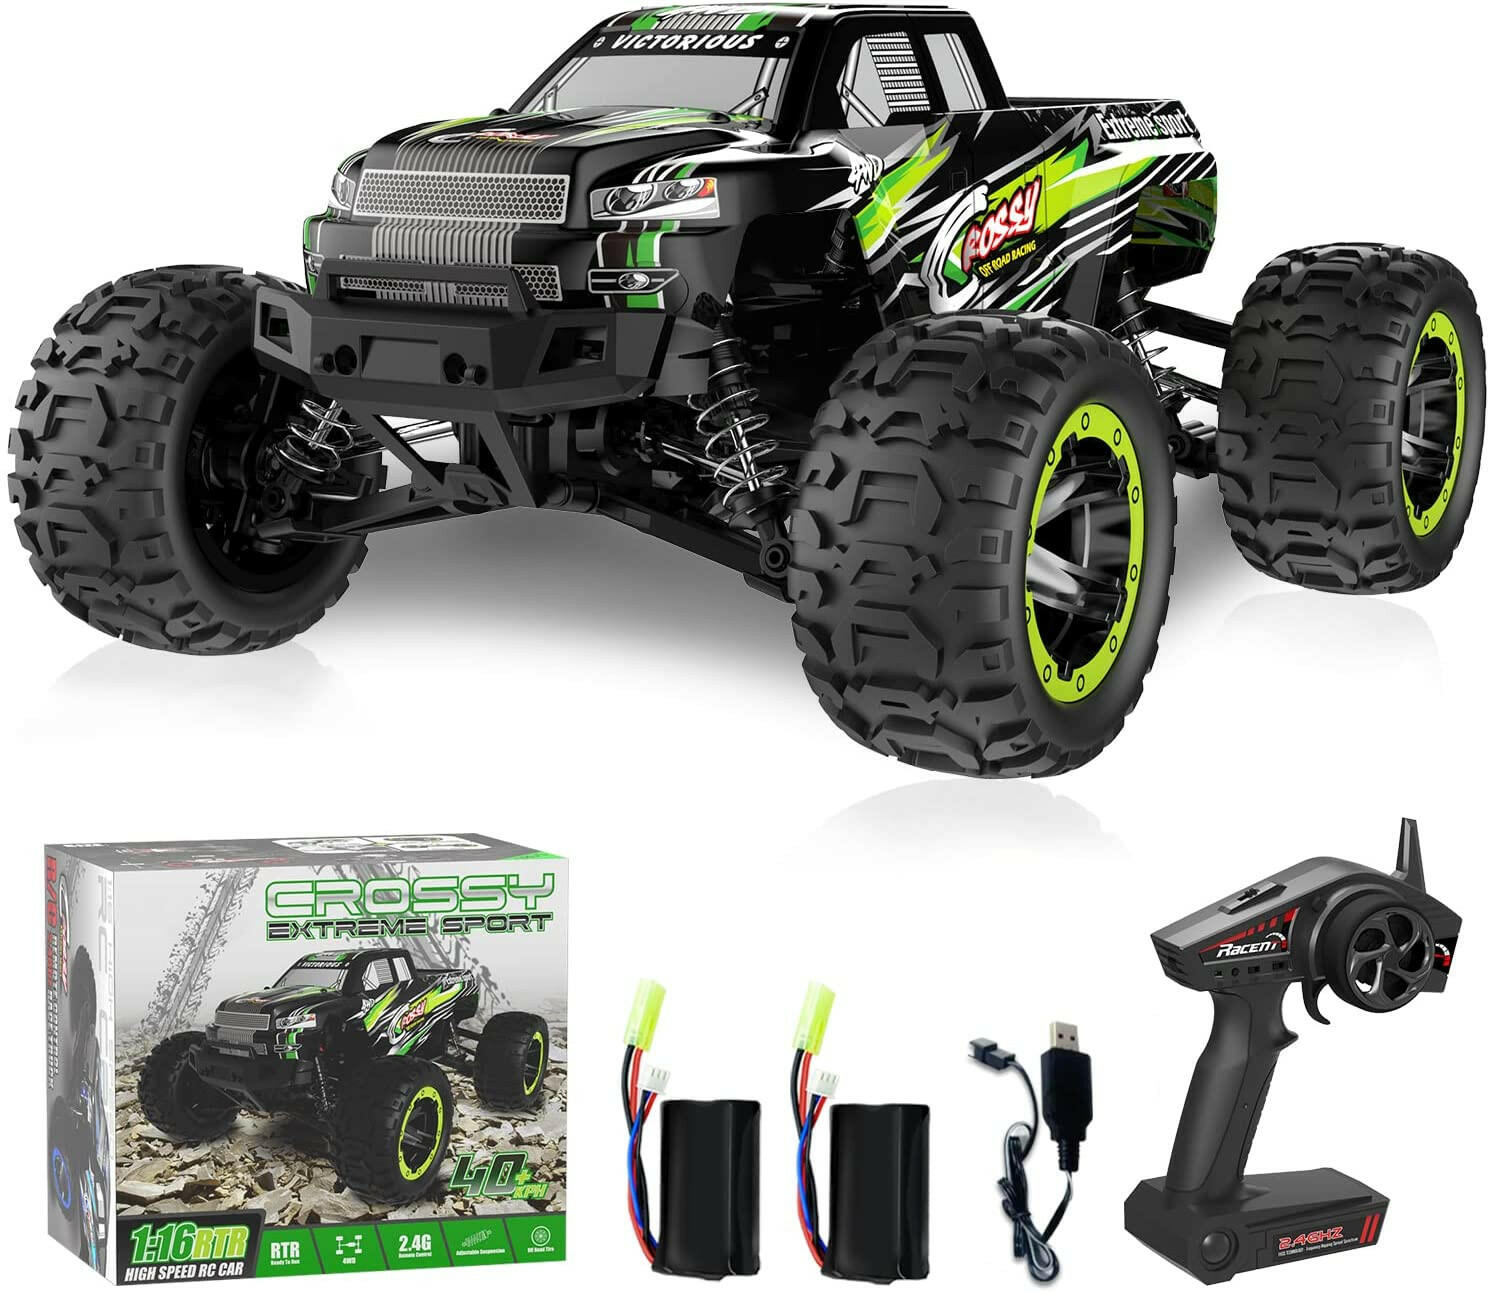 Remote Control Racing Car Fast Speedy Car Toy Able To Drift Race Batteries  Powered High-speed Drifting Raing Electric Vehicle Fo - AliExpress